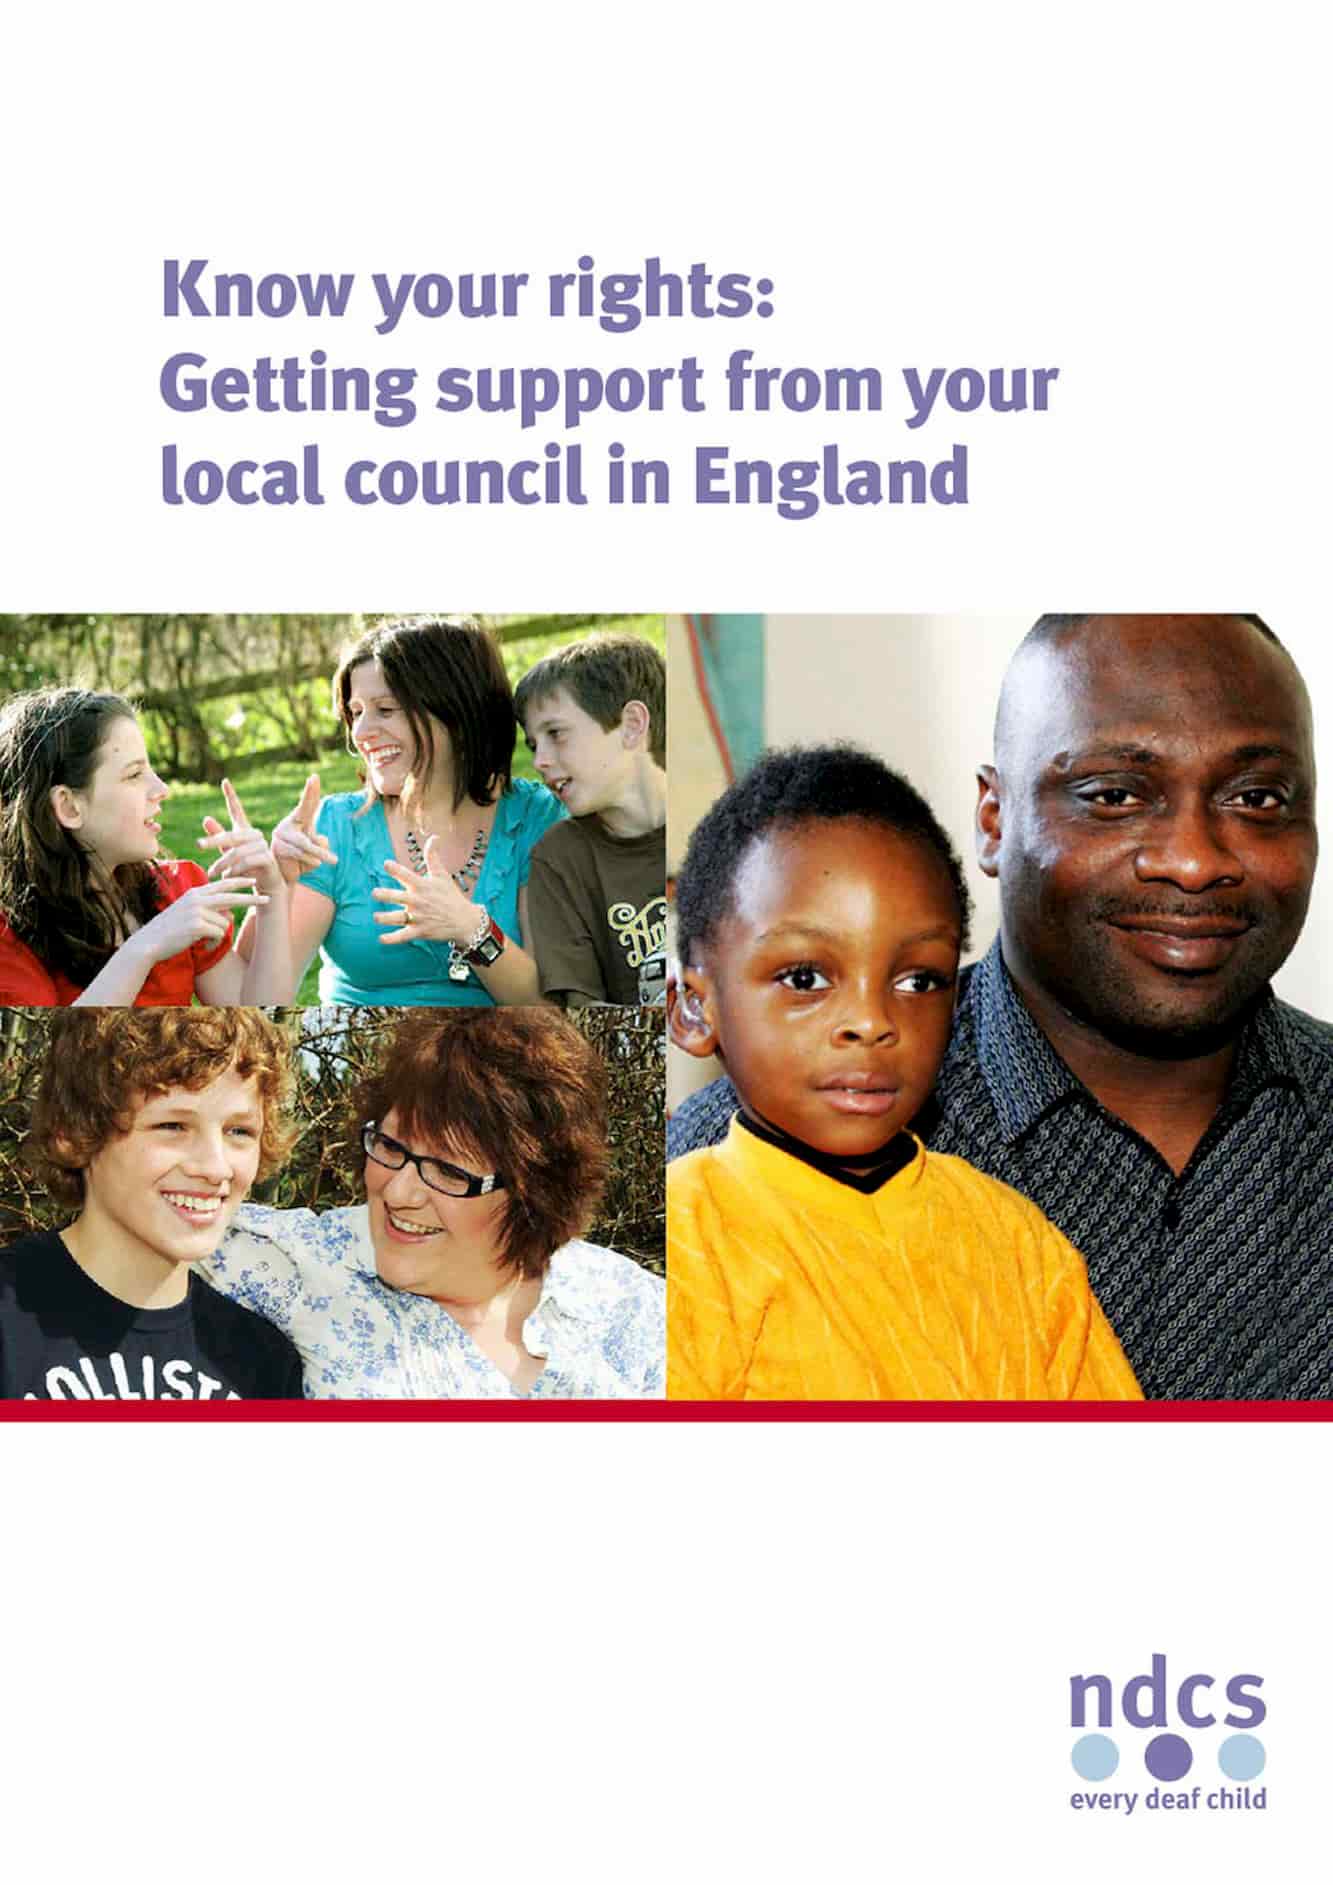 Know your rights: Getting support from your local council in England